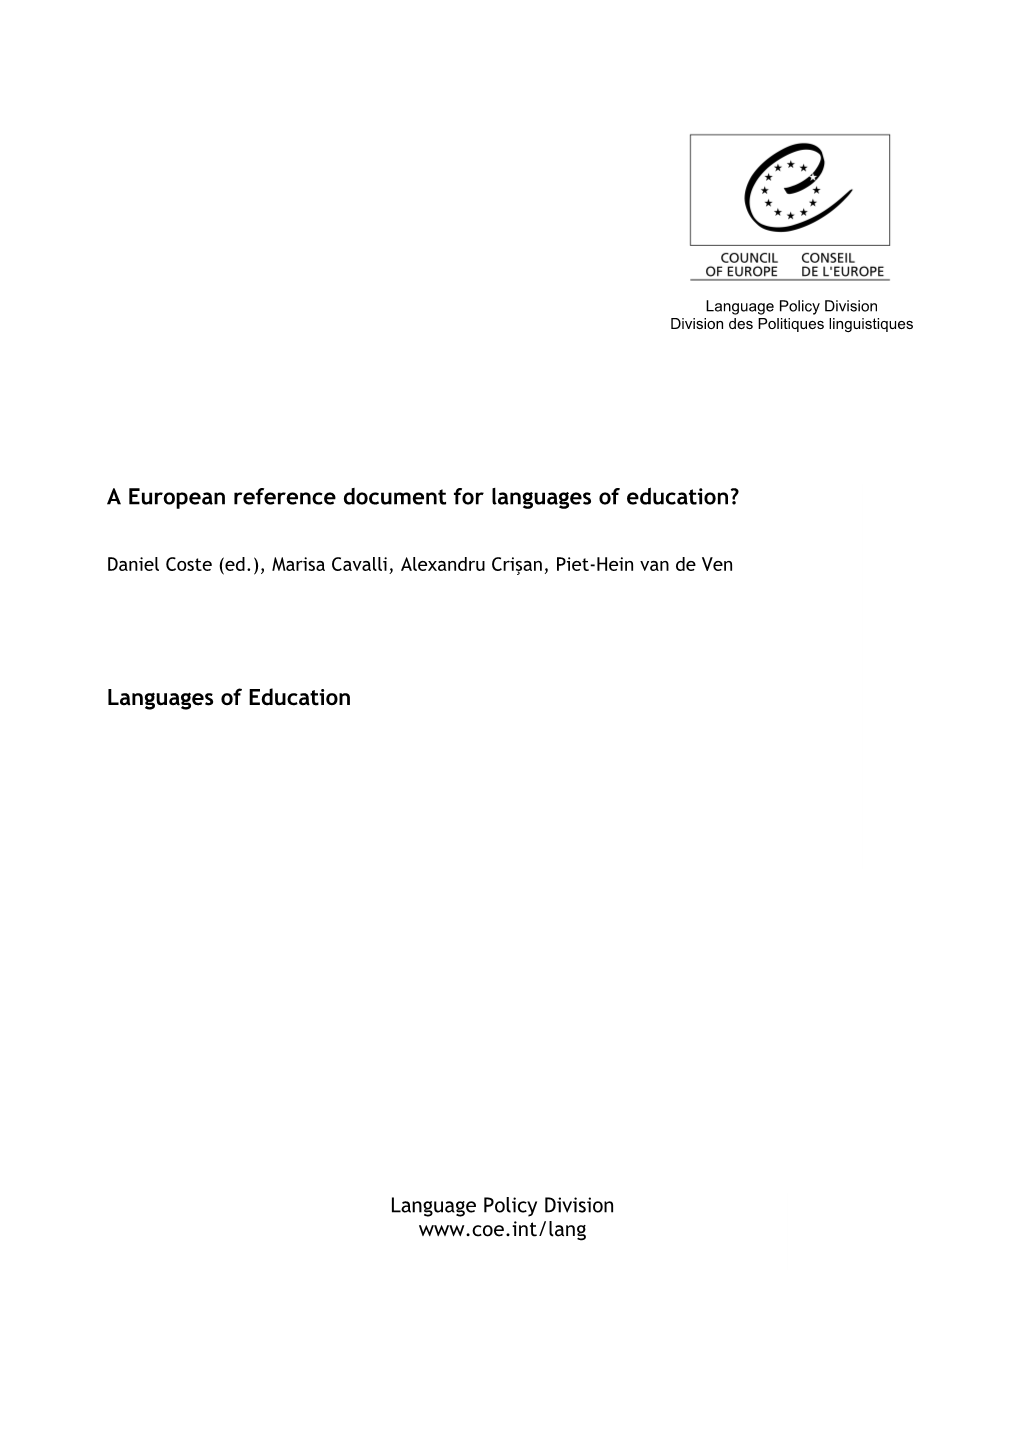 A European Reference Document for Languages of Education?